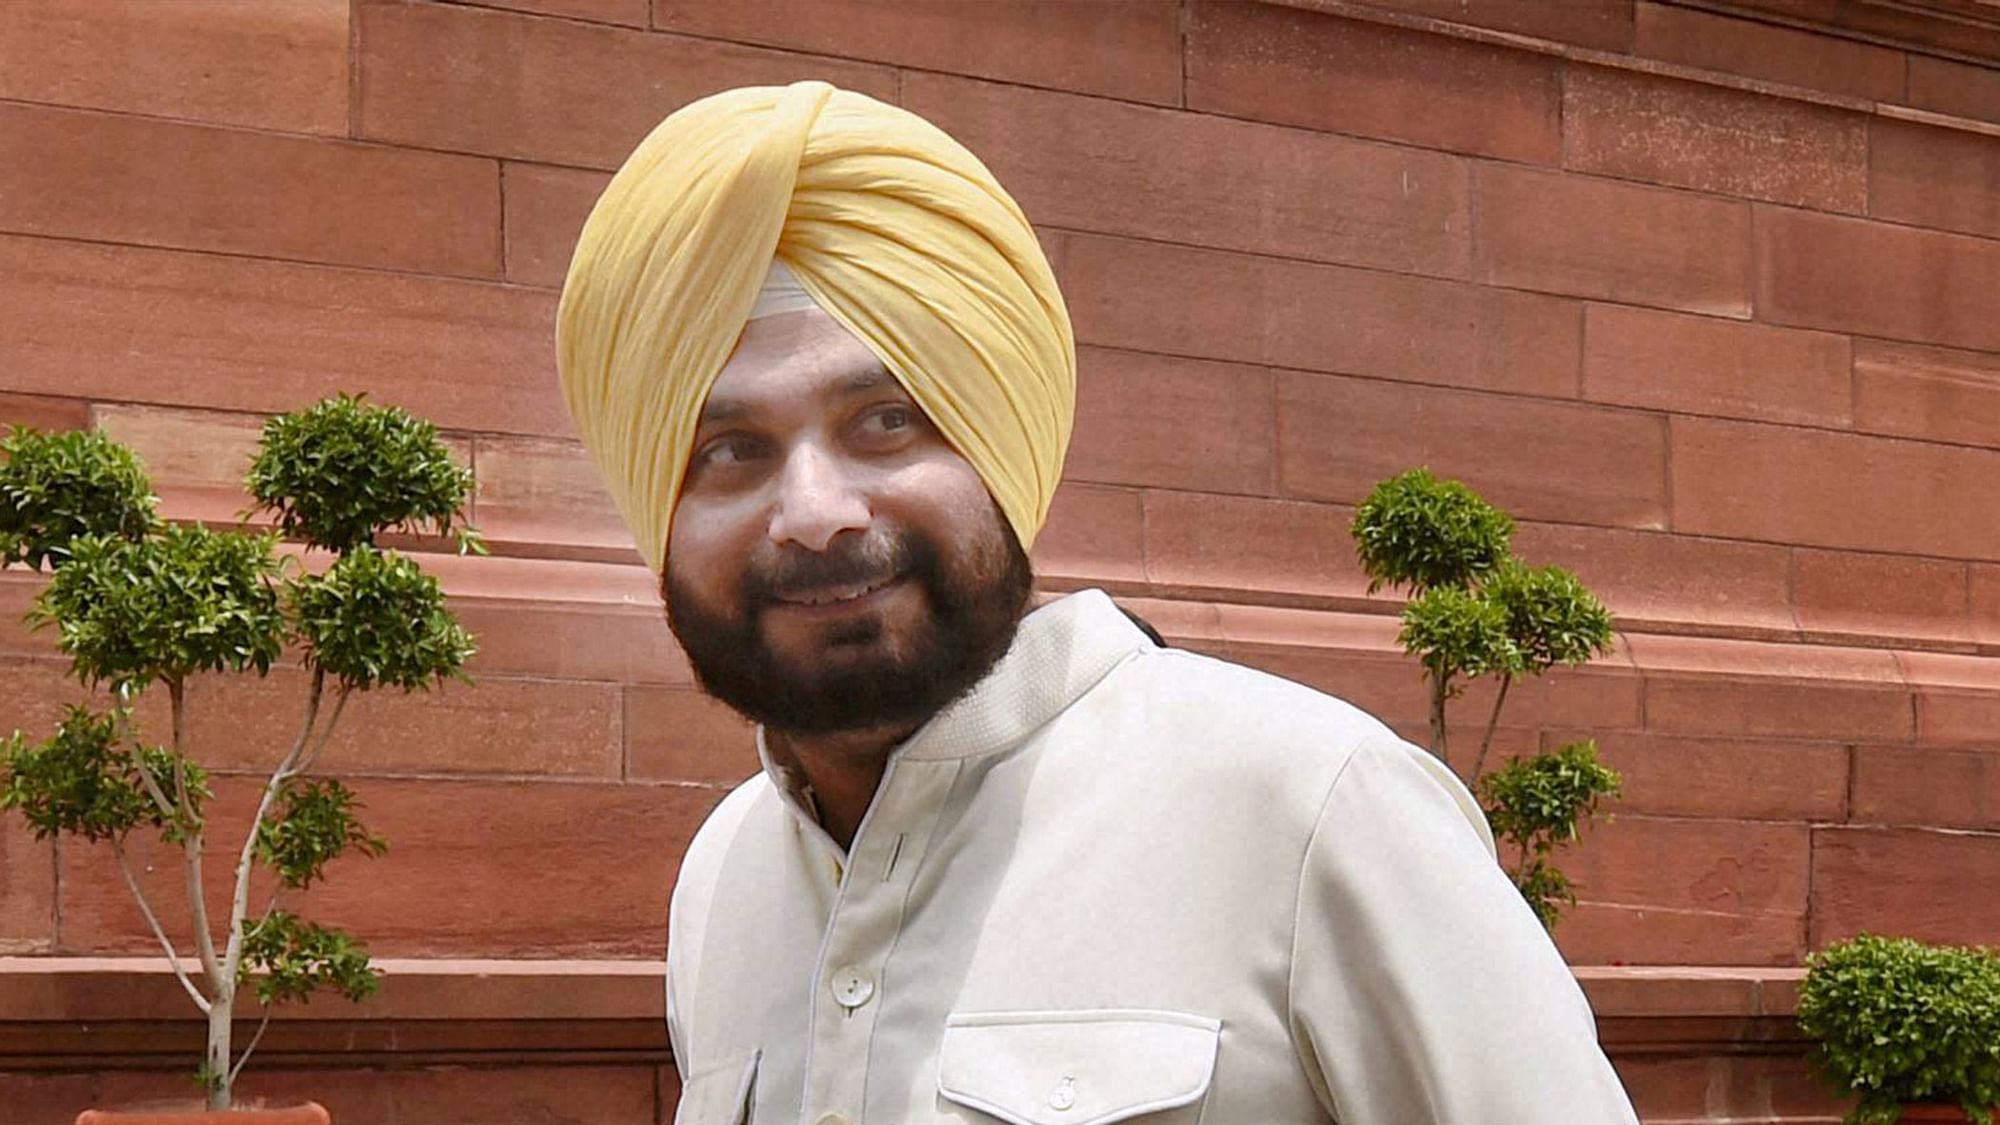 The confusion over Sidhu’s joining the AAP continues. (Photo: <b>The Quint</b>)